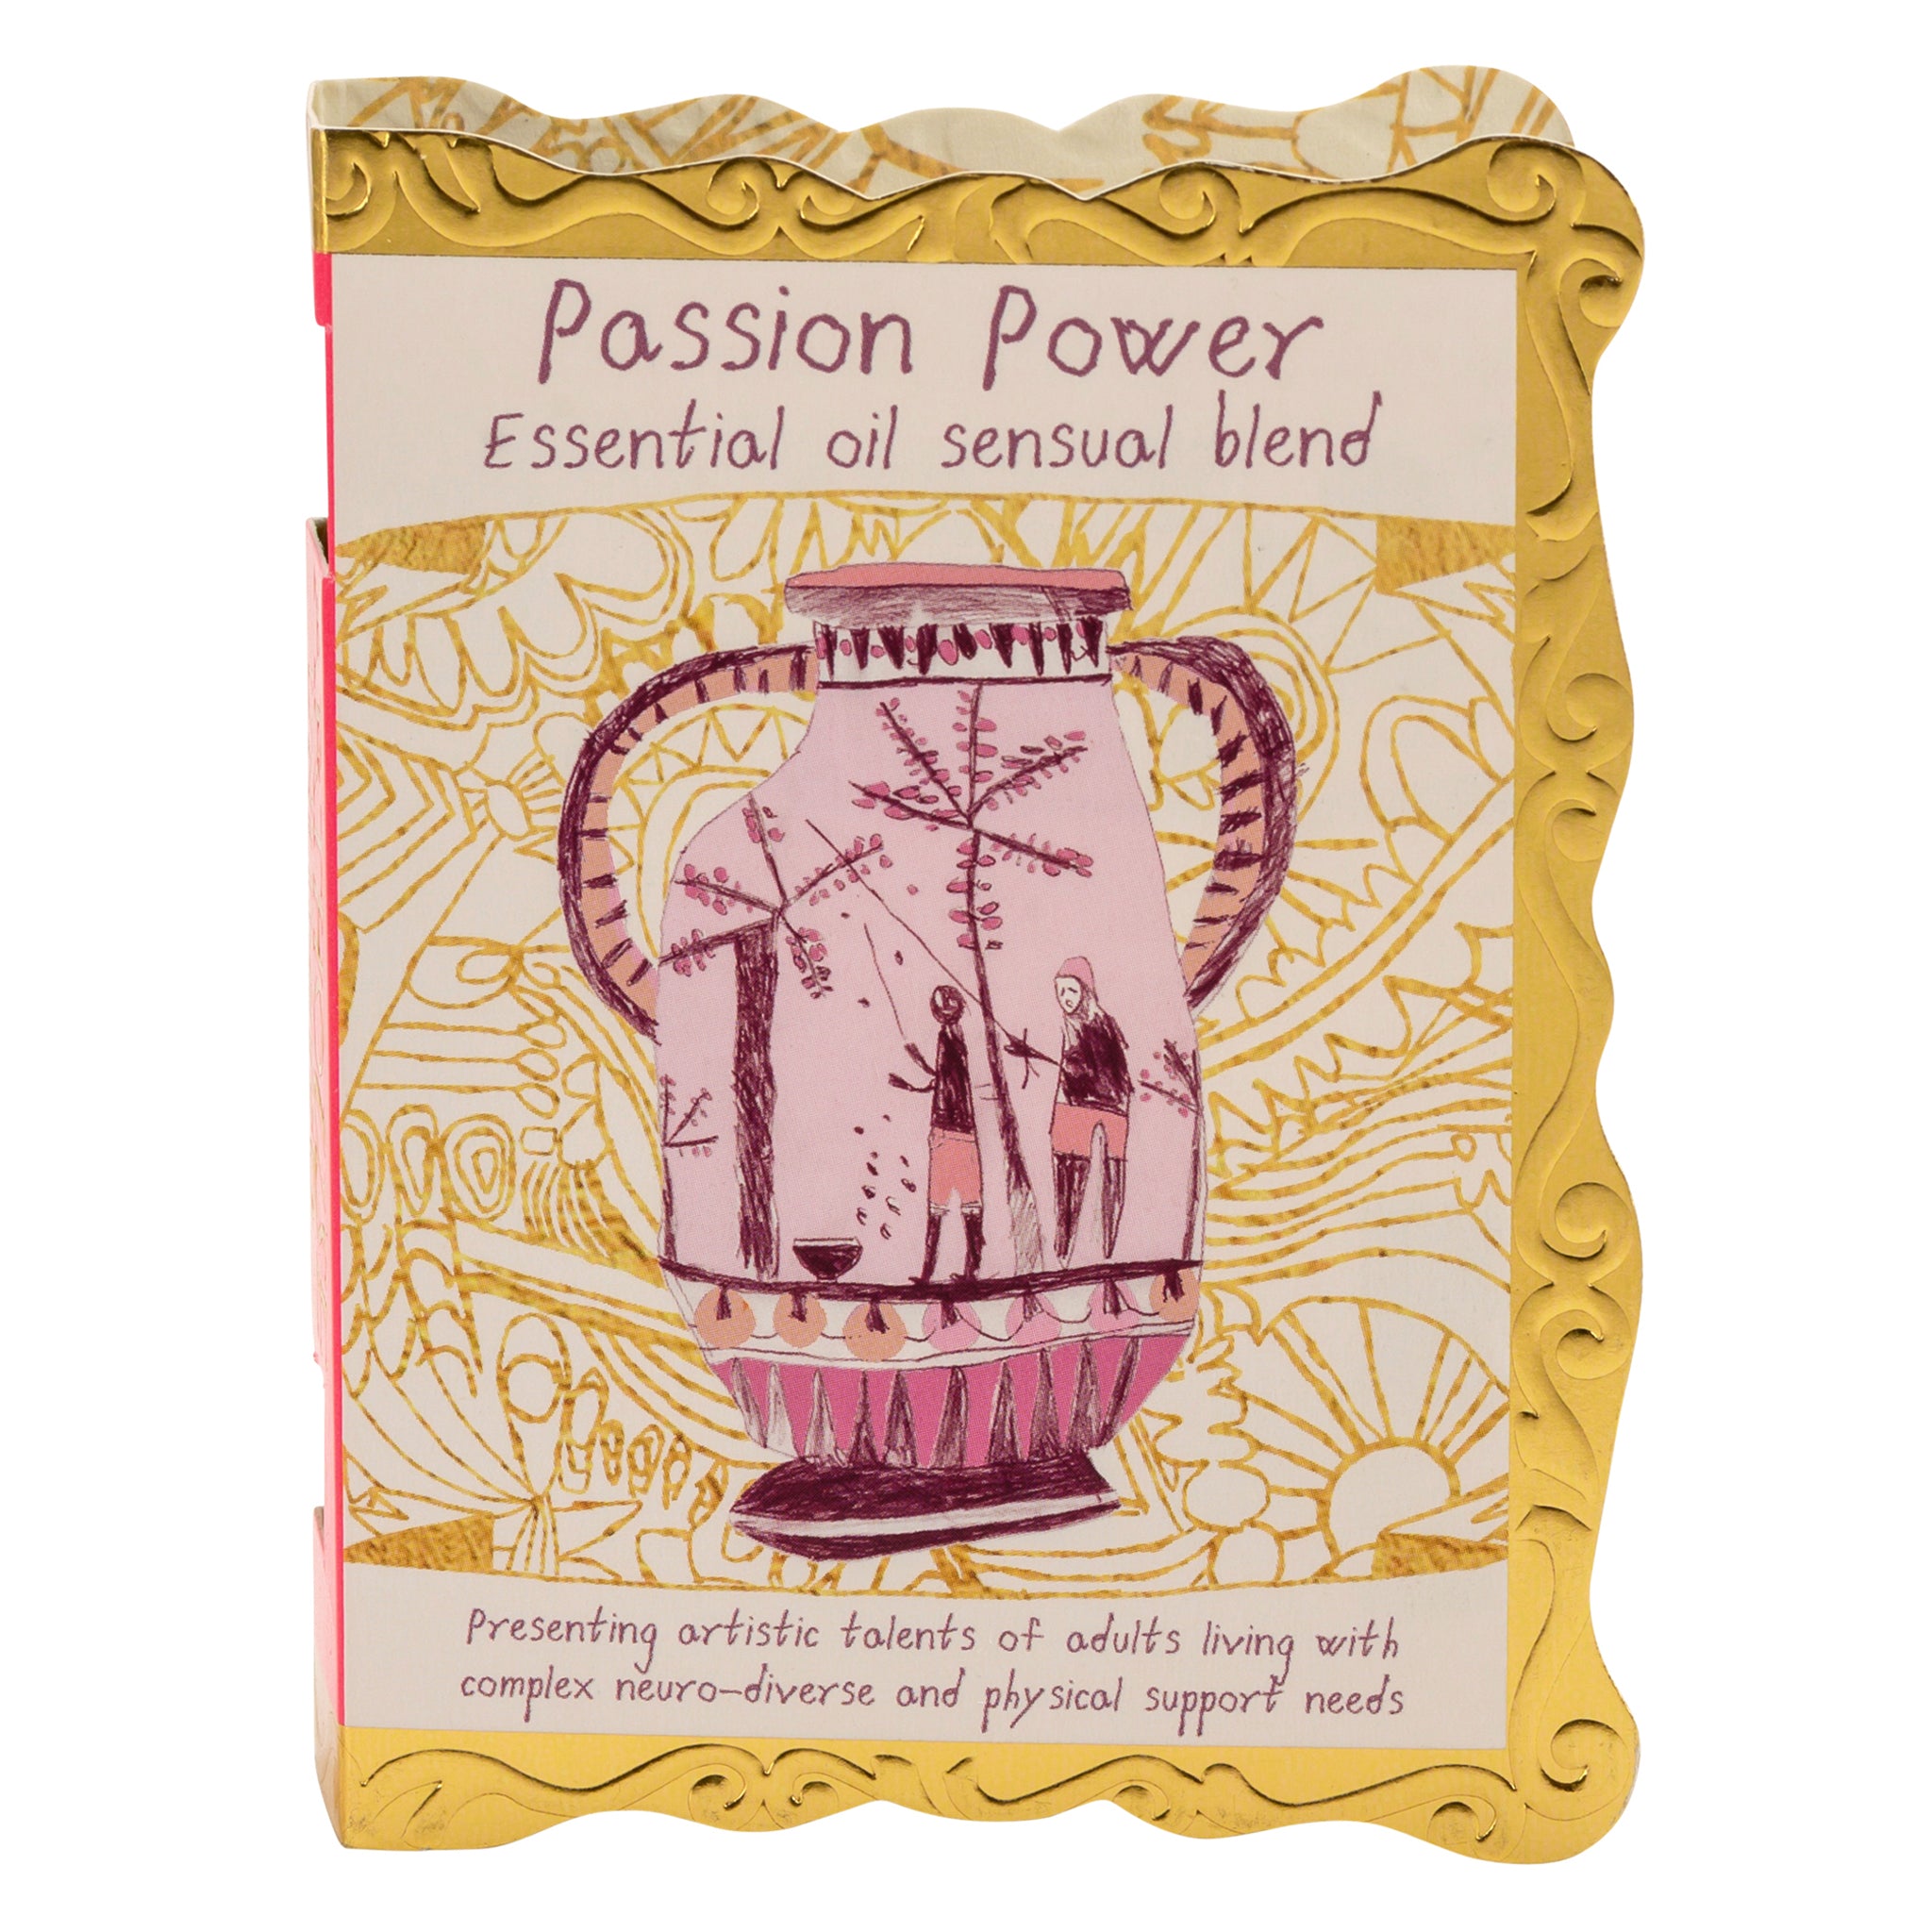 Gold and pink packet containing Passion Power, Well Being Essential Oil, Sensual Blend